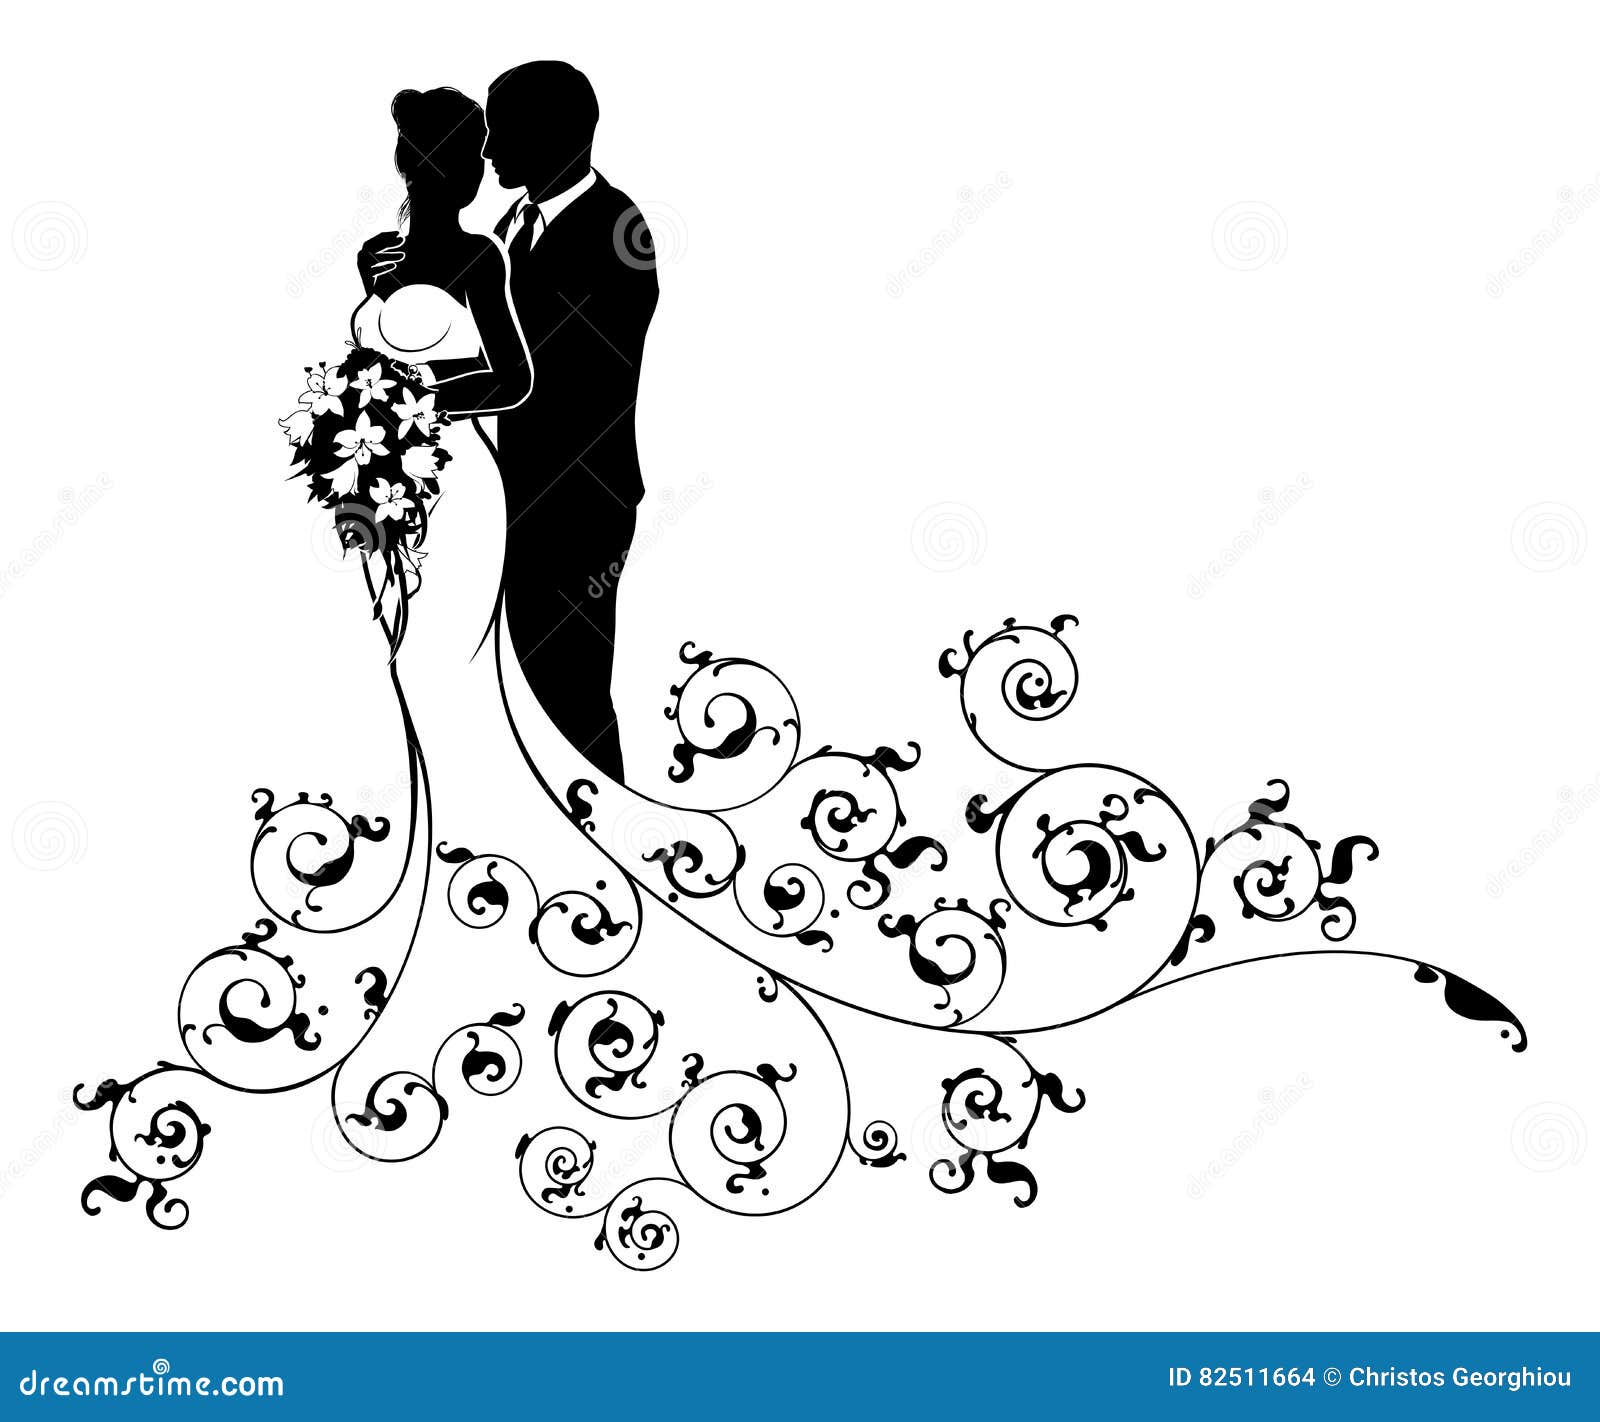 bride and groom couple wedding silhouette abstract